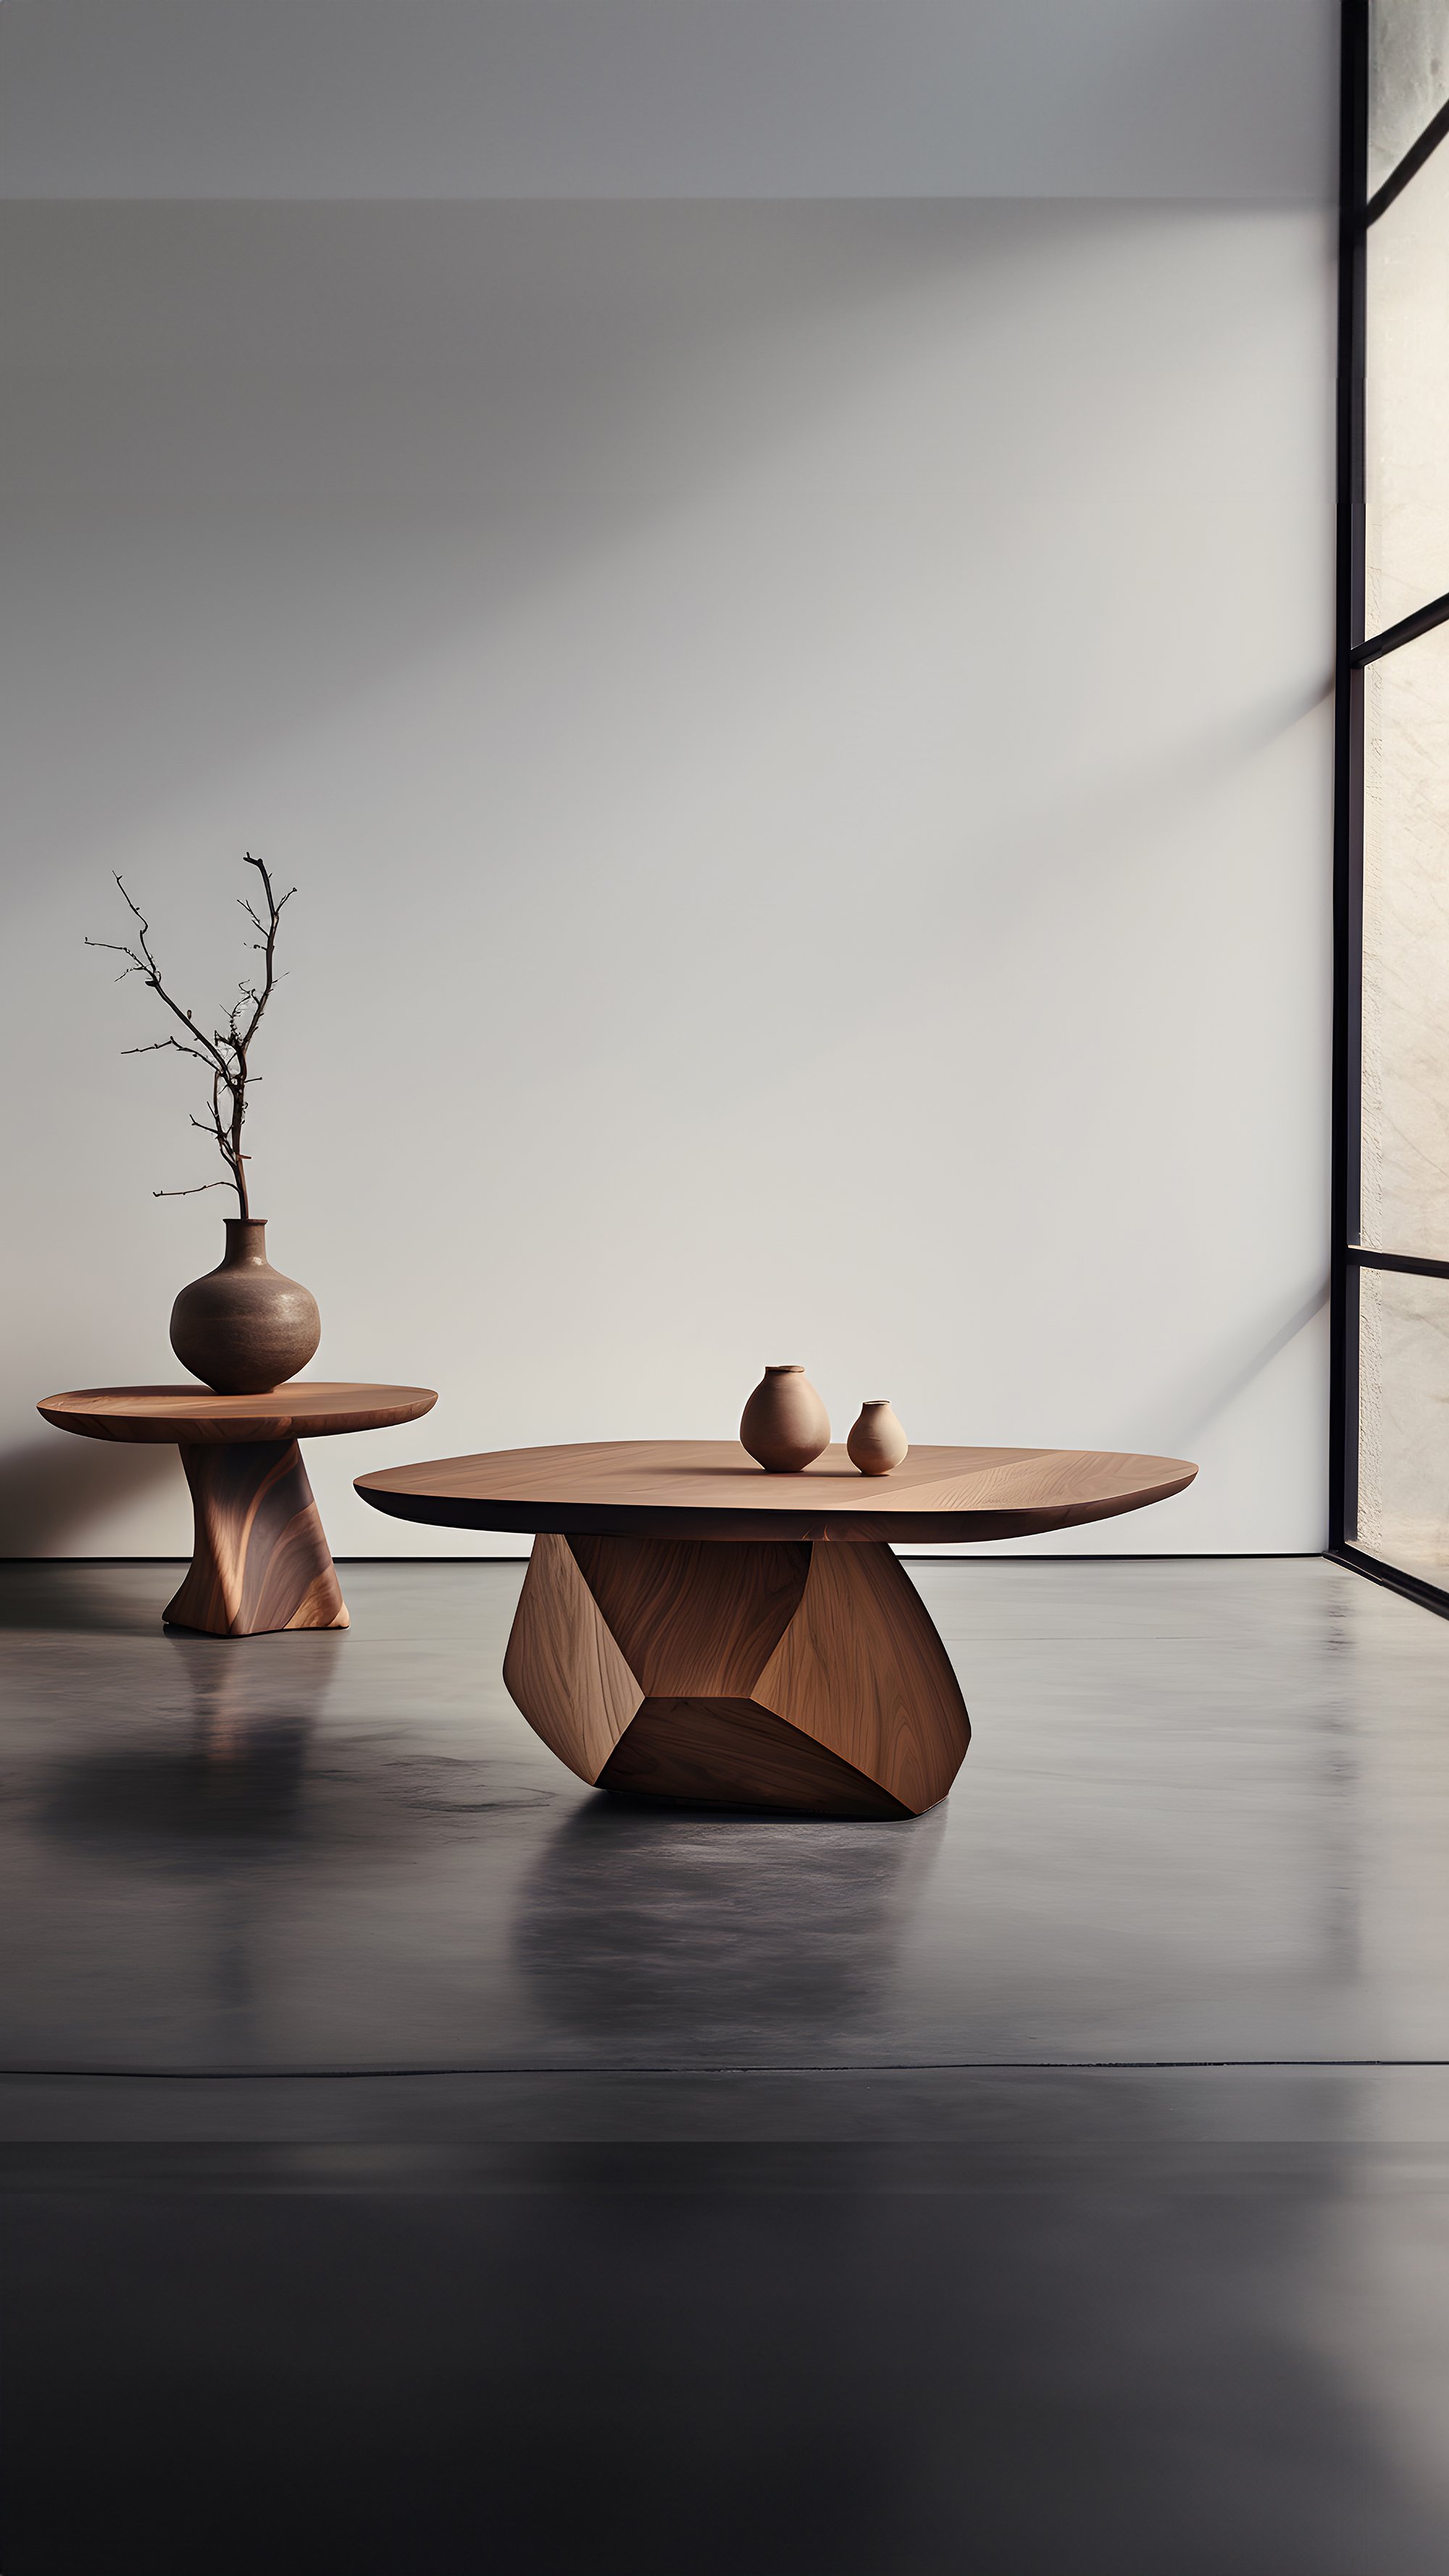 Sculptural Coffee Table Made of Solid Wood, Center Table Solace S39 by Joel Escalona — 9.jpg